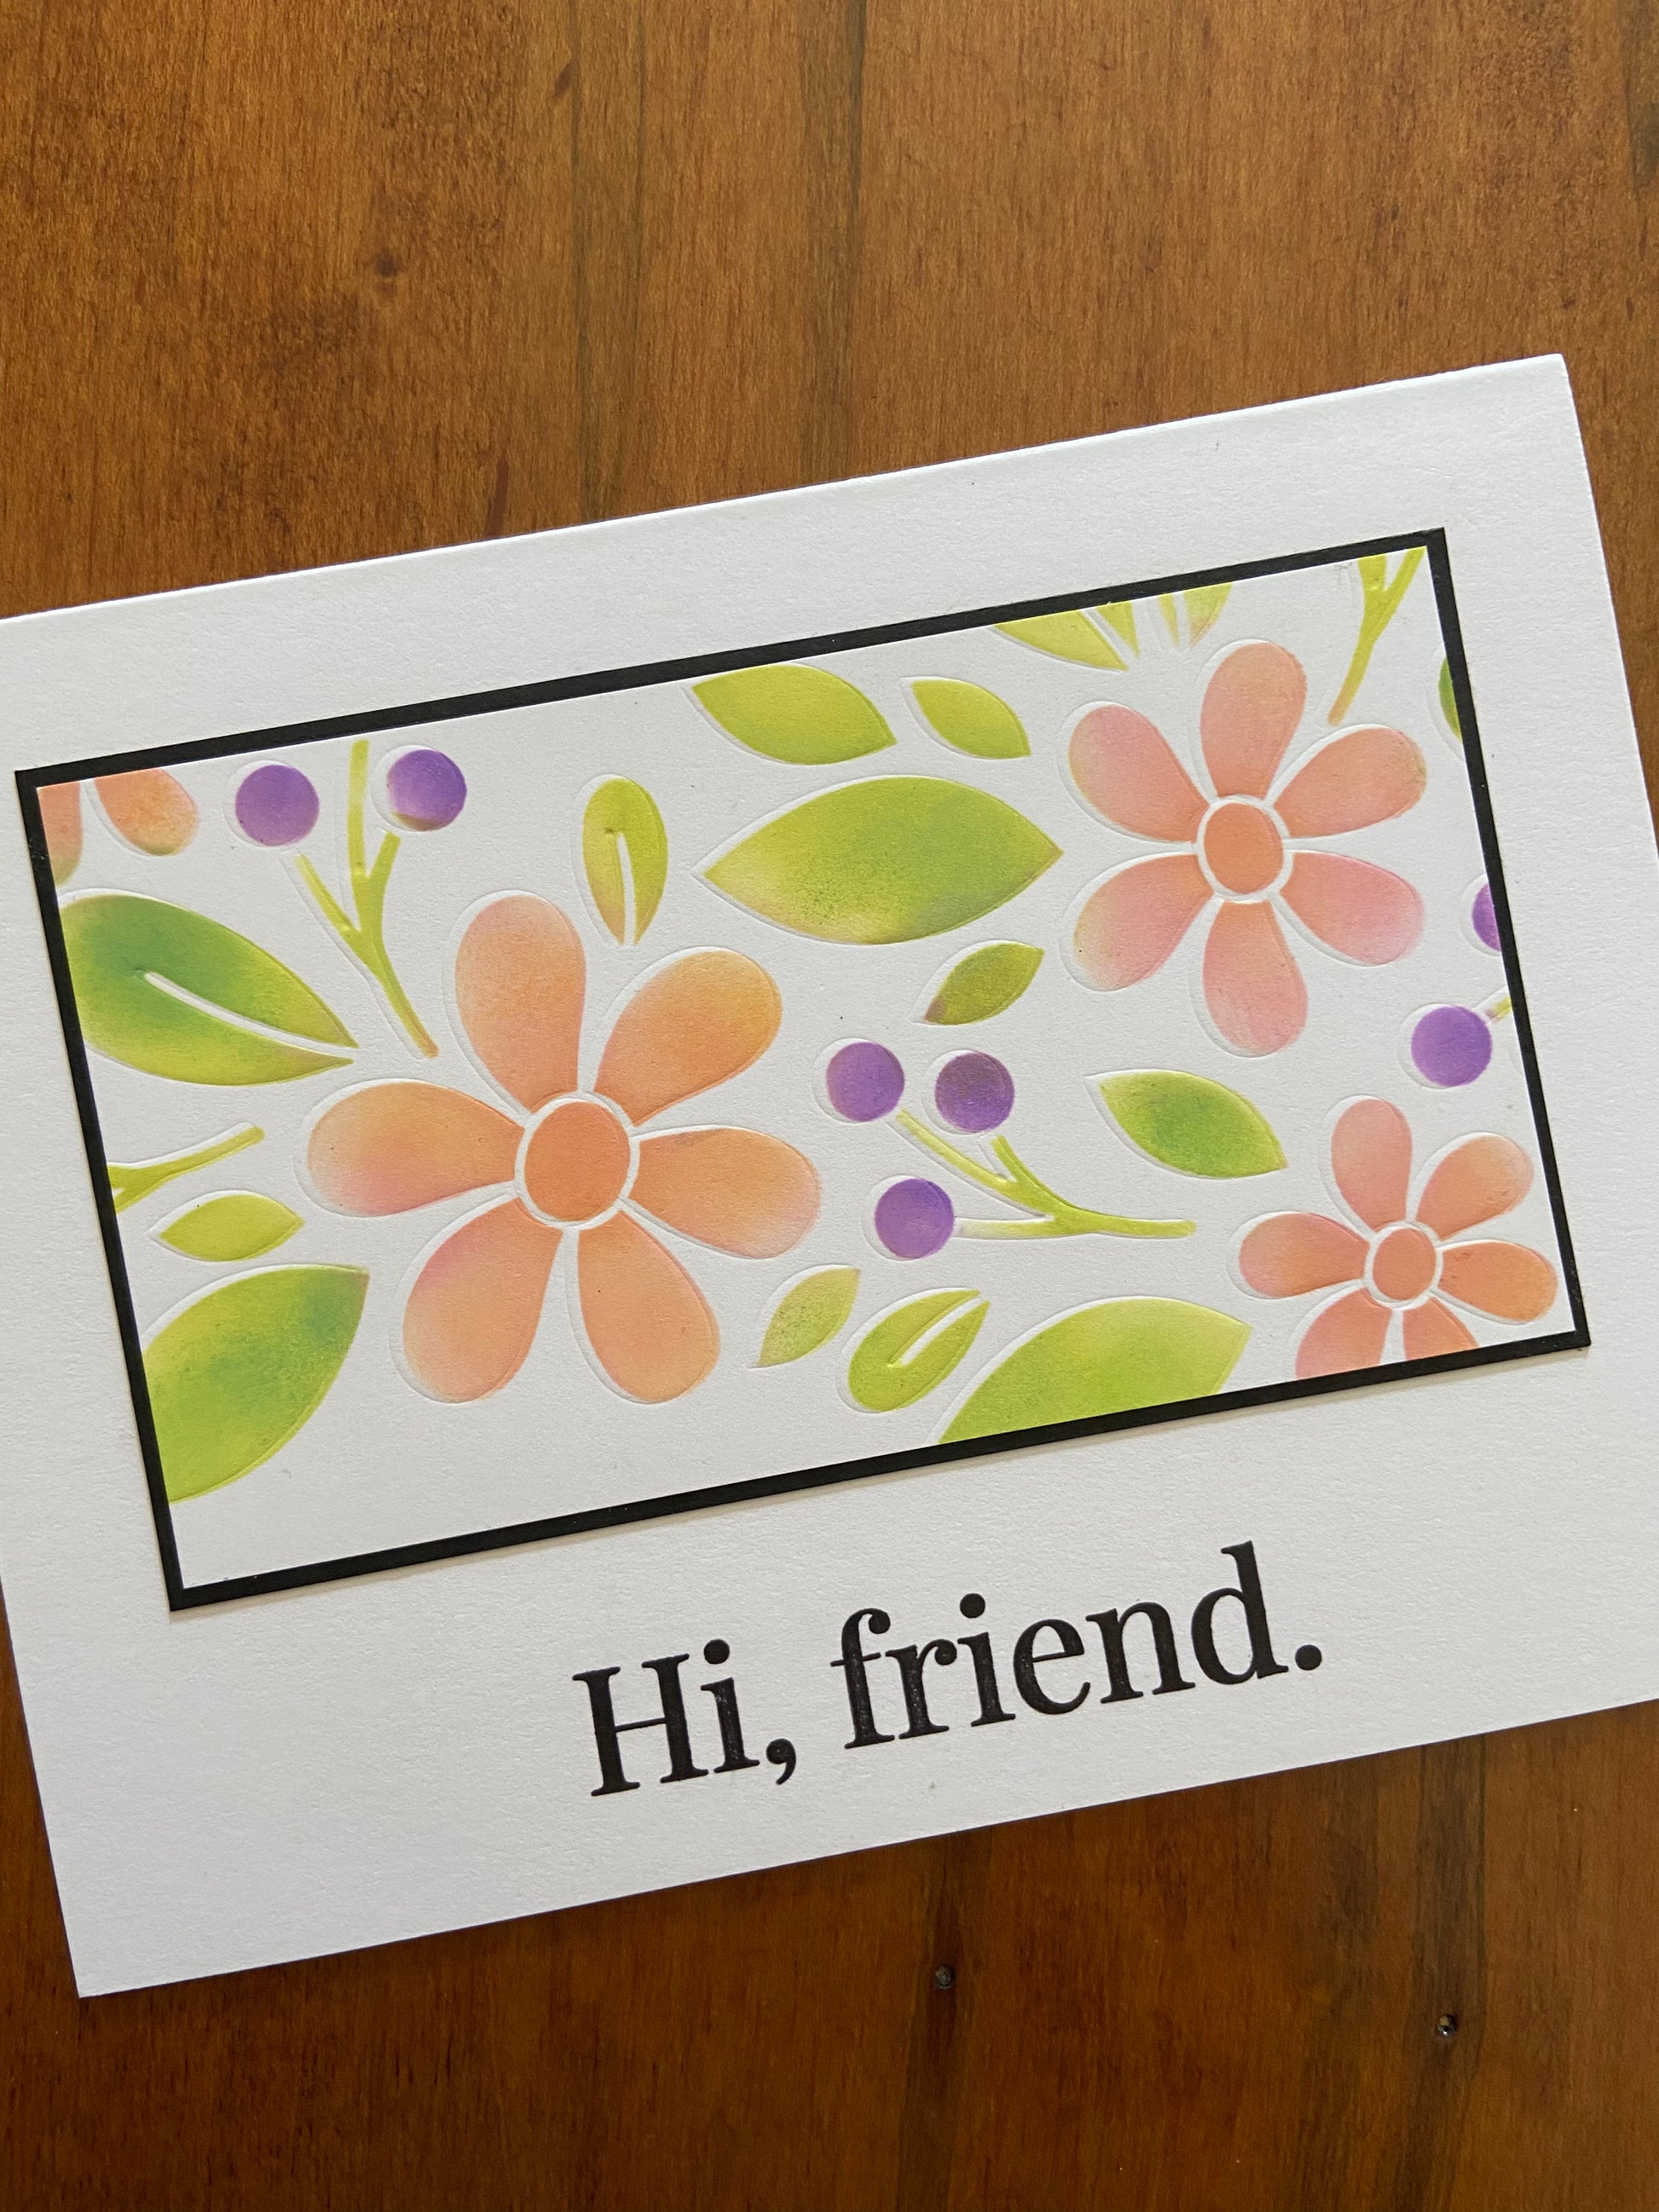 Floral hi friend handmade card. Stencilled pink daisy like flowers with greenery and purple berries. 